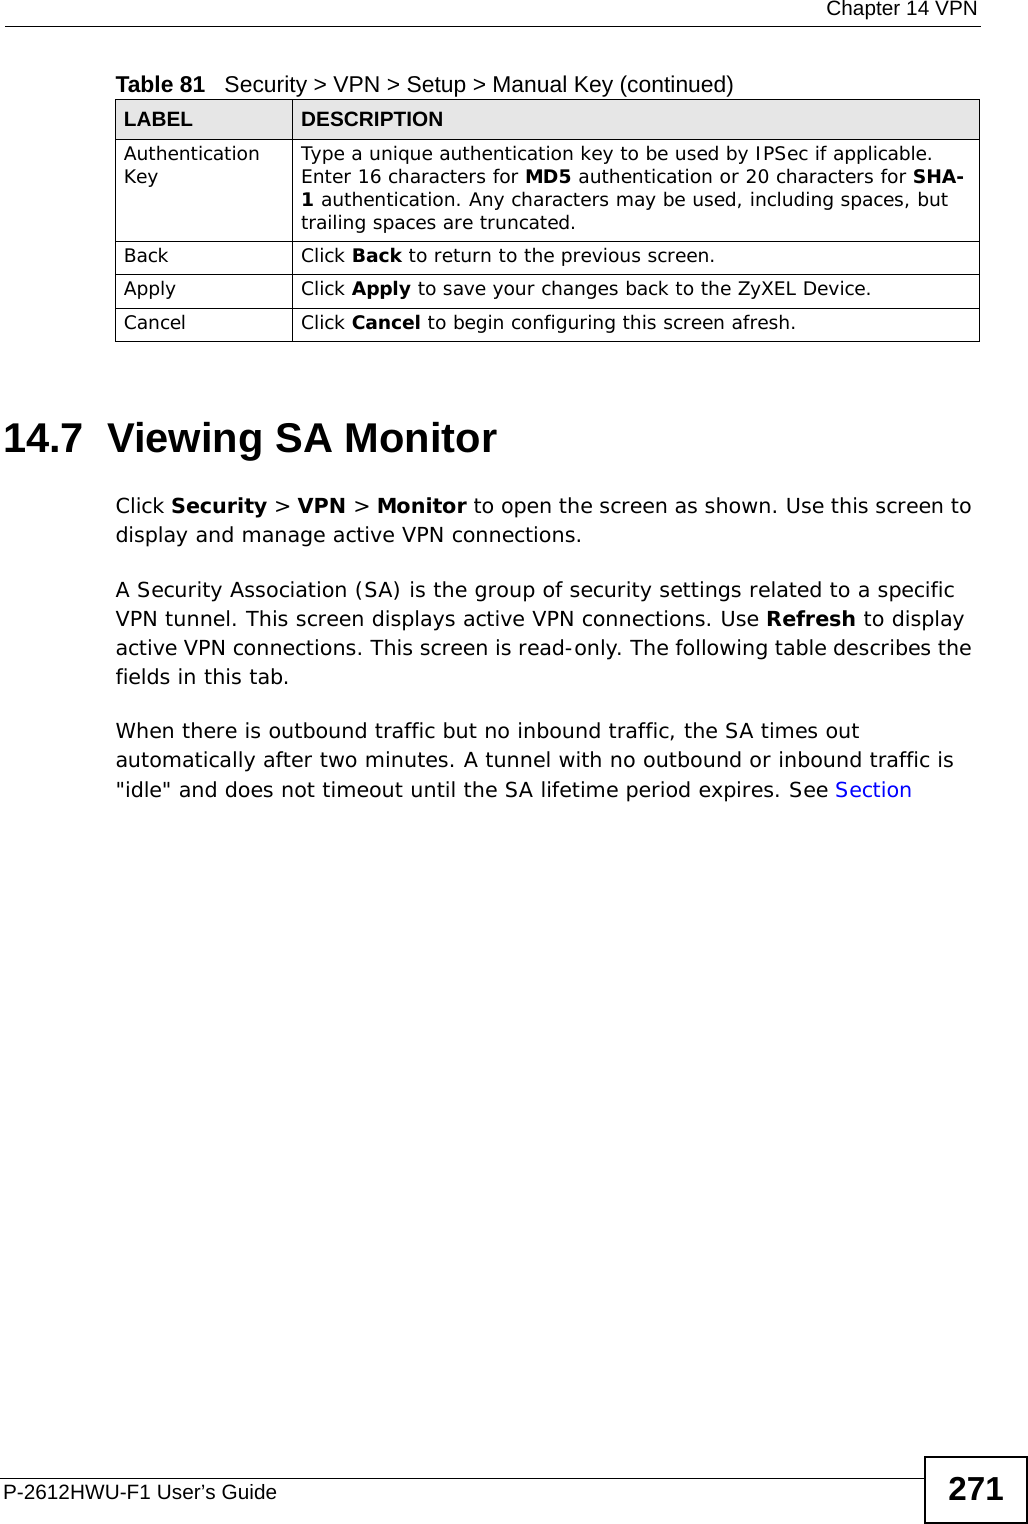  Chapter 14 VPNP-2612HWU-F1 User’s Guide 27114.7  Viewing SA Monitor Click Security &gt; VPN &gt; Monitor to open the screen as shown. Use this screen to display and manage active VPN connections.A Security Association (SA) is the group of security settings related to a specific VPN tunnel. This screen displays active VPN connections. Use Refresh to display active VPN connections. This screen is read-only. The following table describes the fields in this tab.When there is outbound traffic but no inbound traffic, the SA times out automatically after two minutes. A tunnel with no outbound or inbound traffic is &quot;idle&quot; and does not timeout until the SA lifetime period expires. See Section Authentication Key Type a unique authentication key to be used by IPSec if applicable. Enter 16 characters for MD5 authentication or 20 characters for SHA-1 authentication. Any characters may be used, including spaces, but trailing spaces are truncated.Back Click Back to return to the previous screen.Apply Click Apply to save your changes back to the ZyXEL Device.Cancel Click Cancel to begin configuring this screen afresh.Table 81   Security &gt; VPN &gt; Setup &gt; Manual Key (continued)LABEL DESCRIPTION